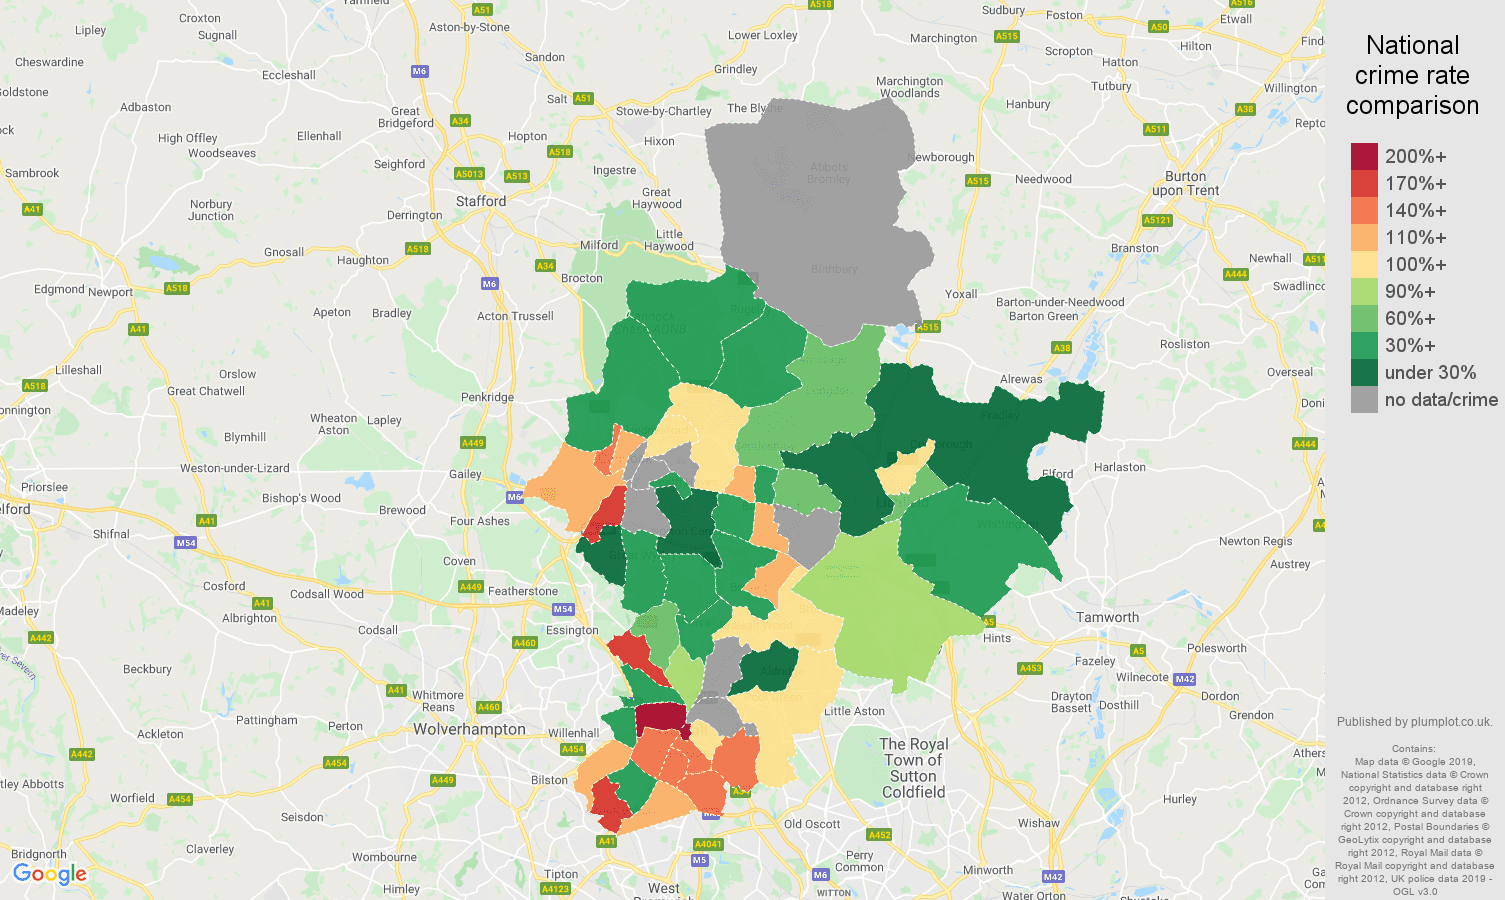 Walsall possession of weapons crime rate comparison map